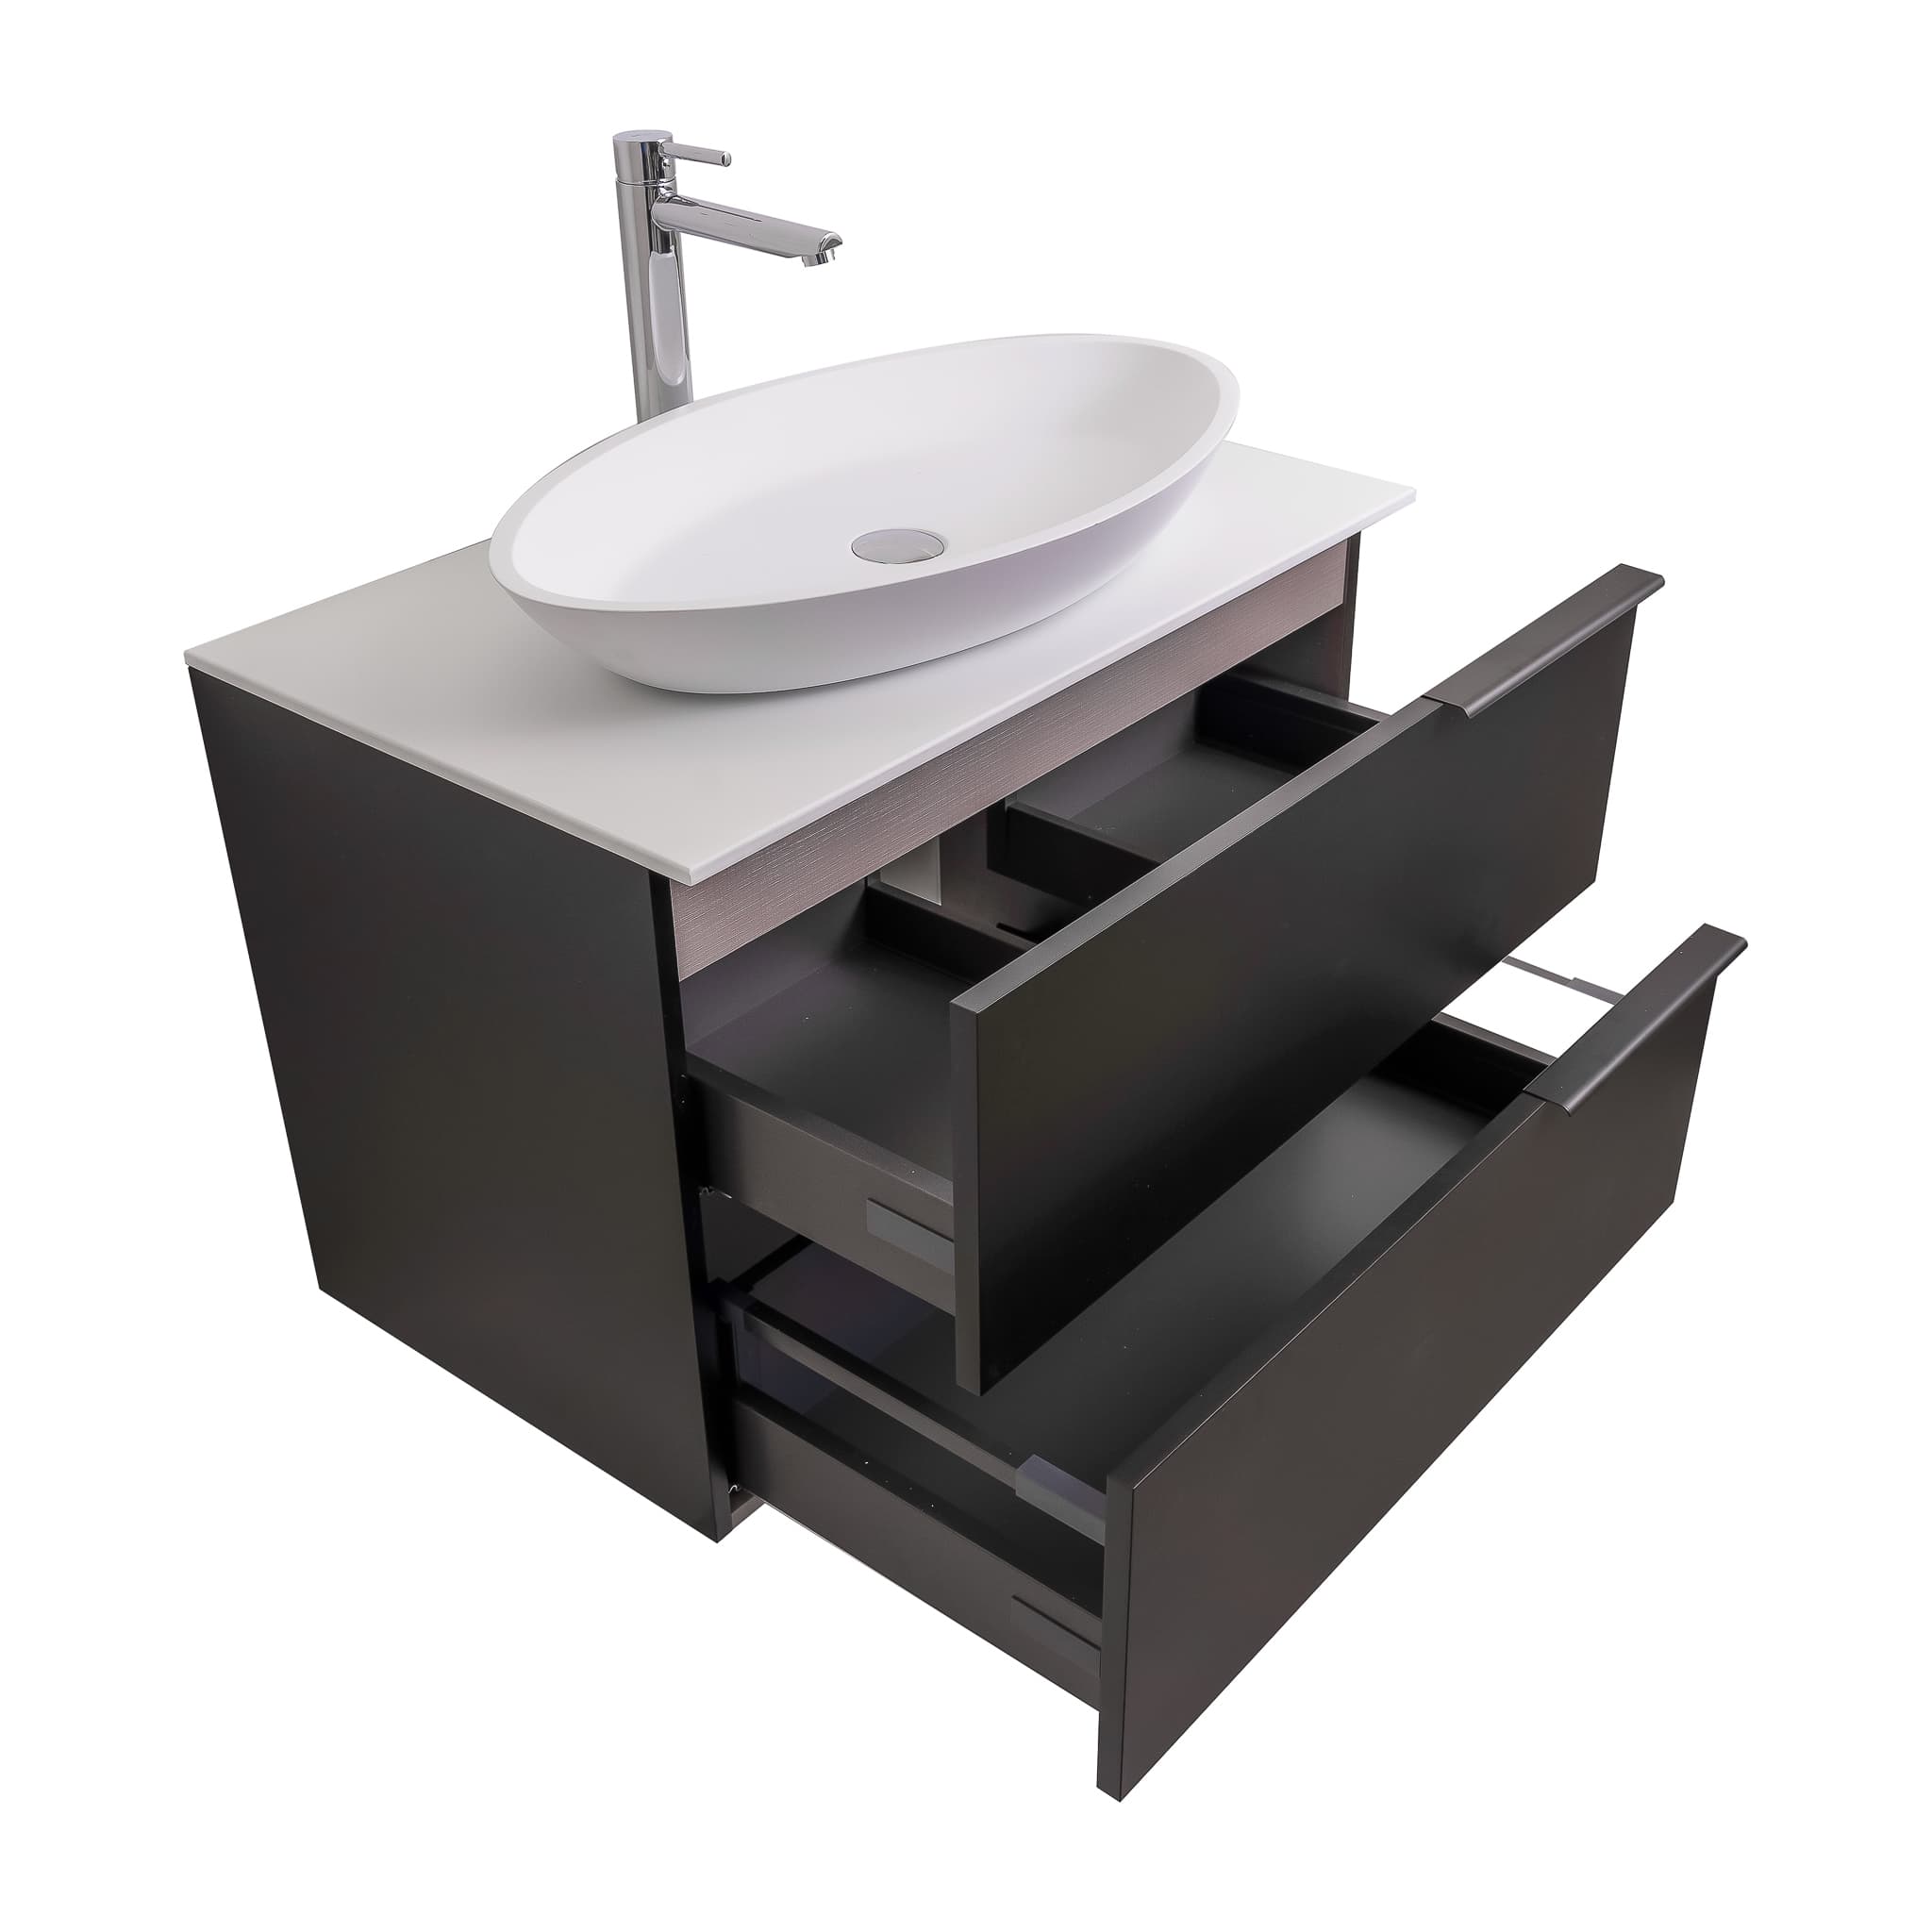 Mallorca 31.5 Matte Black Cabinet, Solid Surface Flat White Counter And Oval Solid Surface White Basin 1305, Wall Mounted Modern Vanity Set